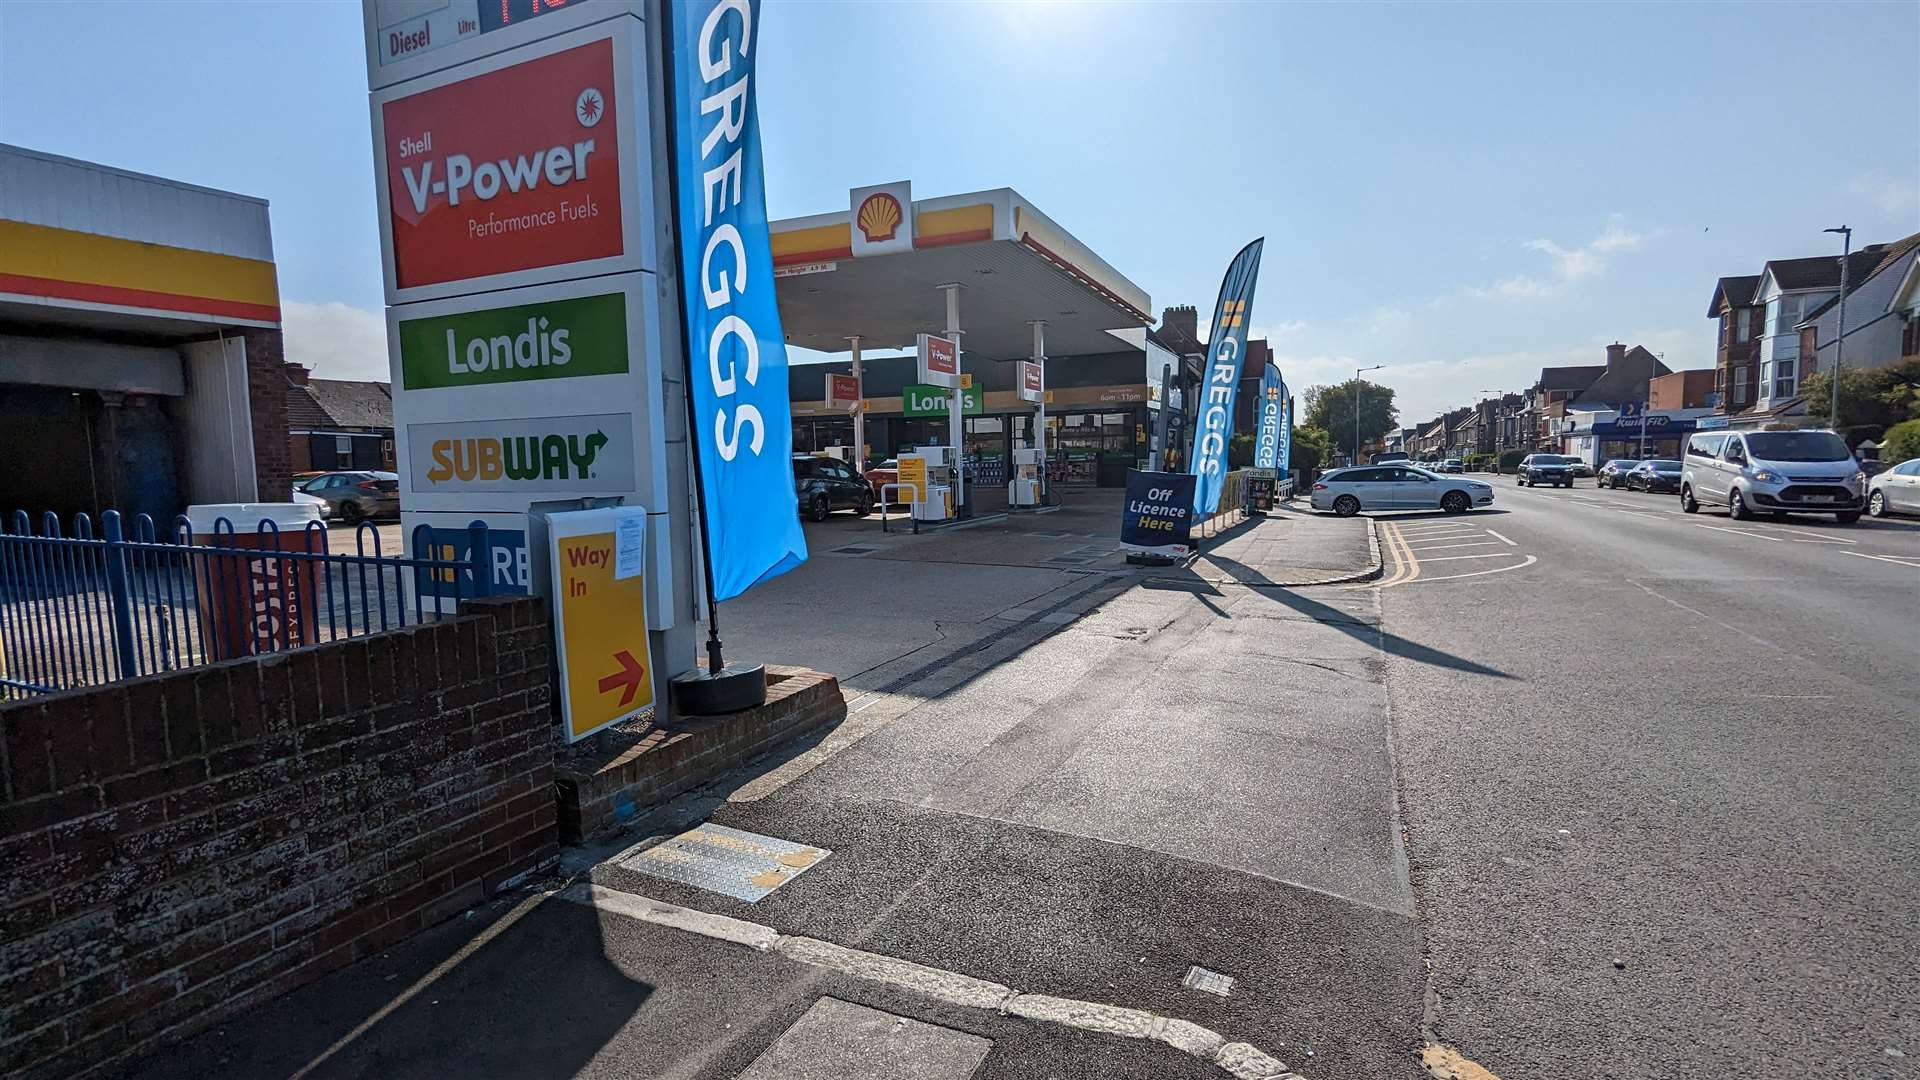 The Greggs has opened at the Shell garage in Cheriton Road, Folkestone